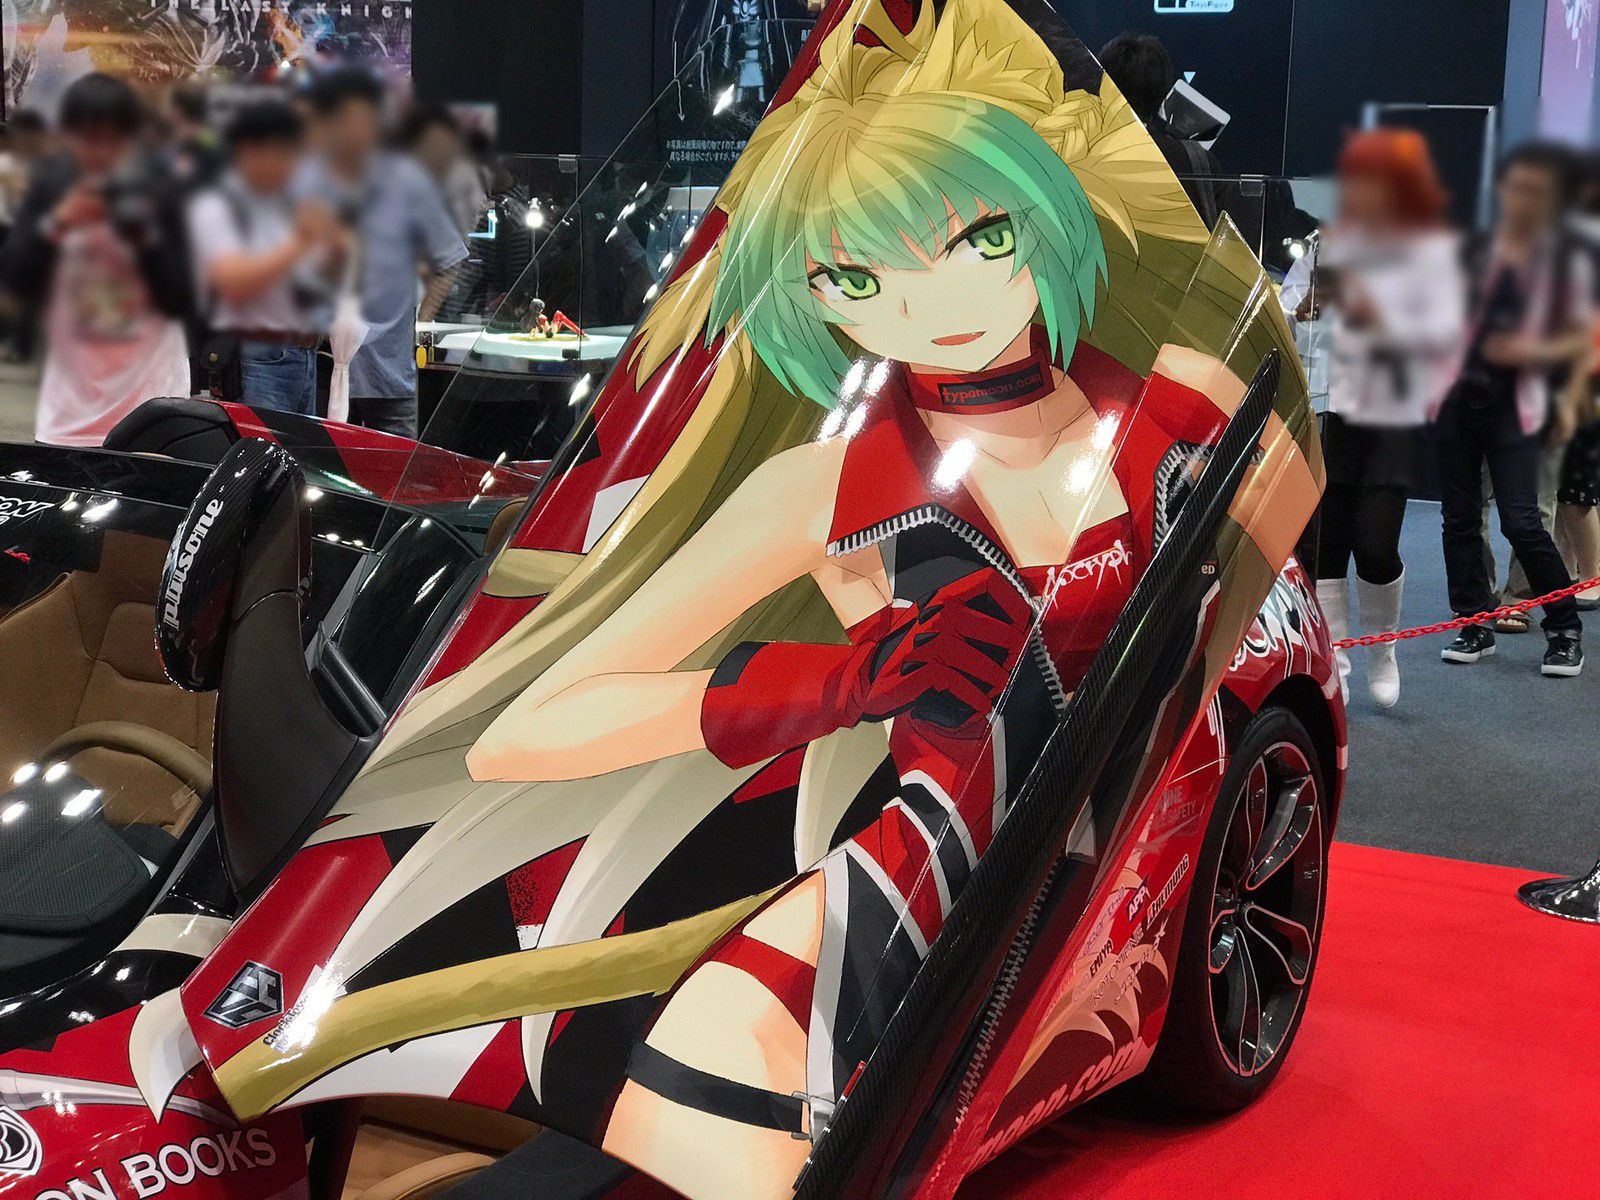 [Fate/APO chestnut] pain car illustrations depicting the erotic race queen figure of girls! 8